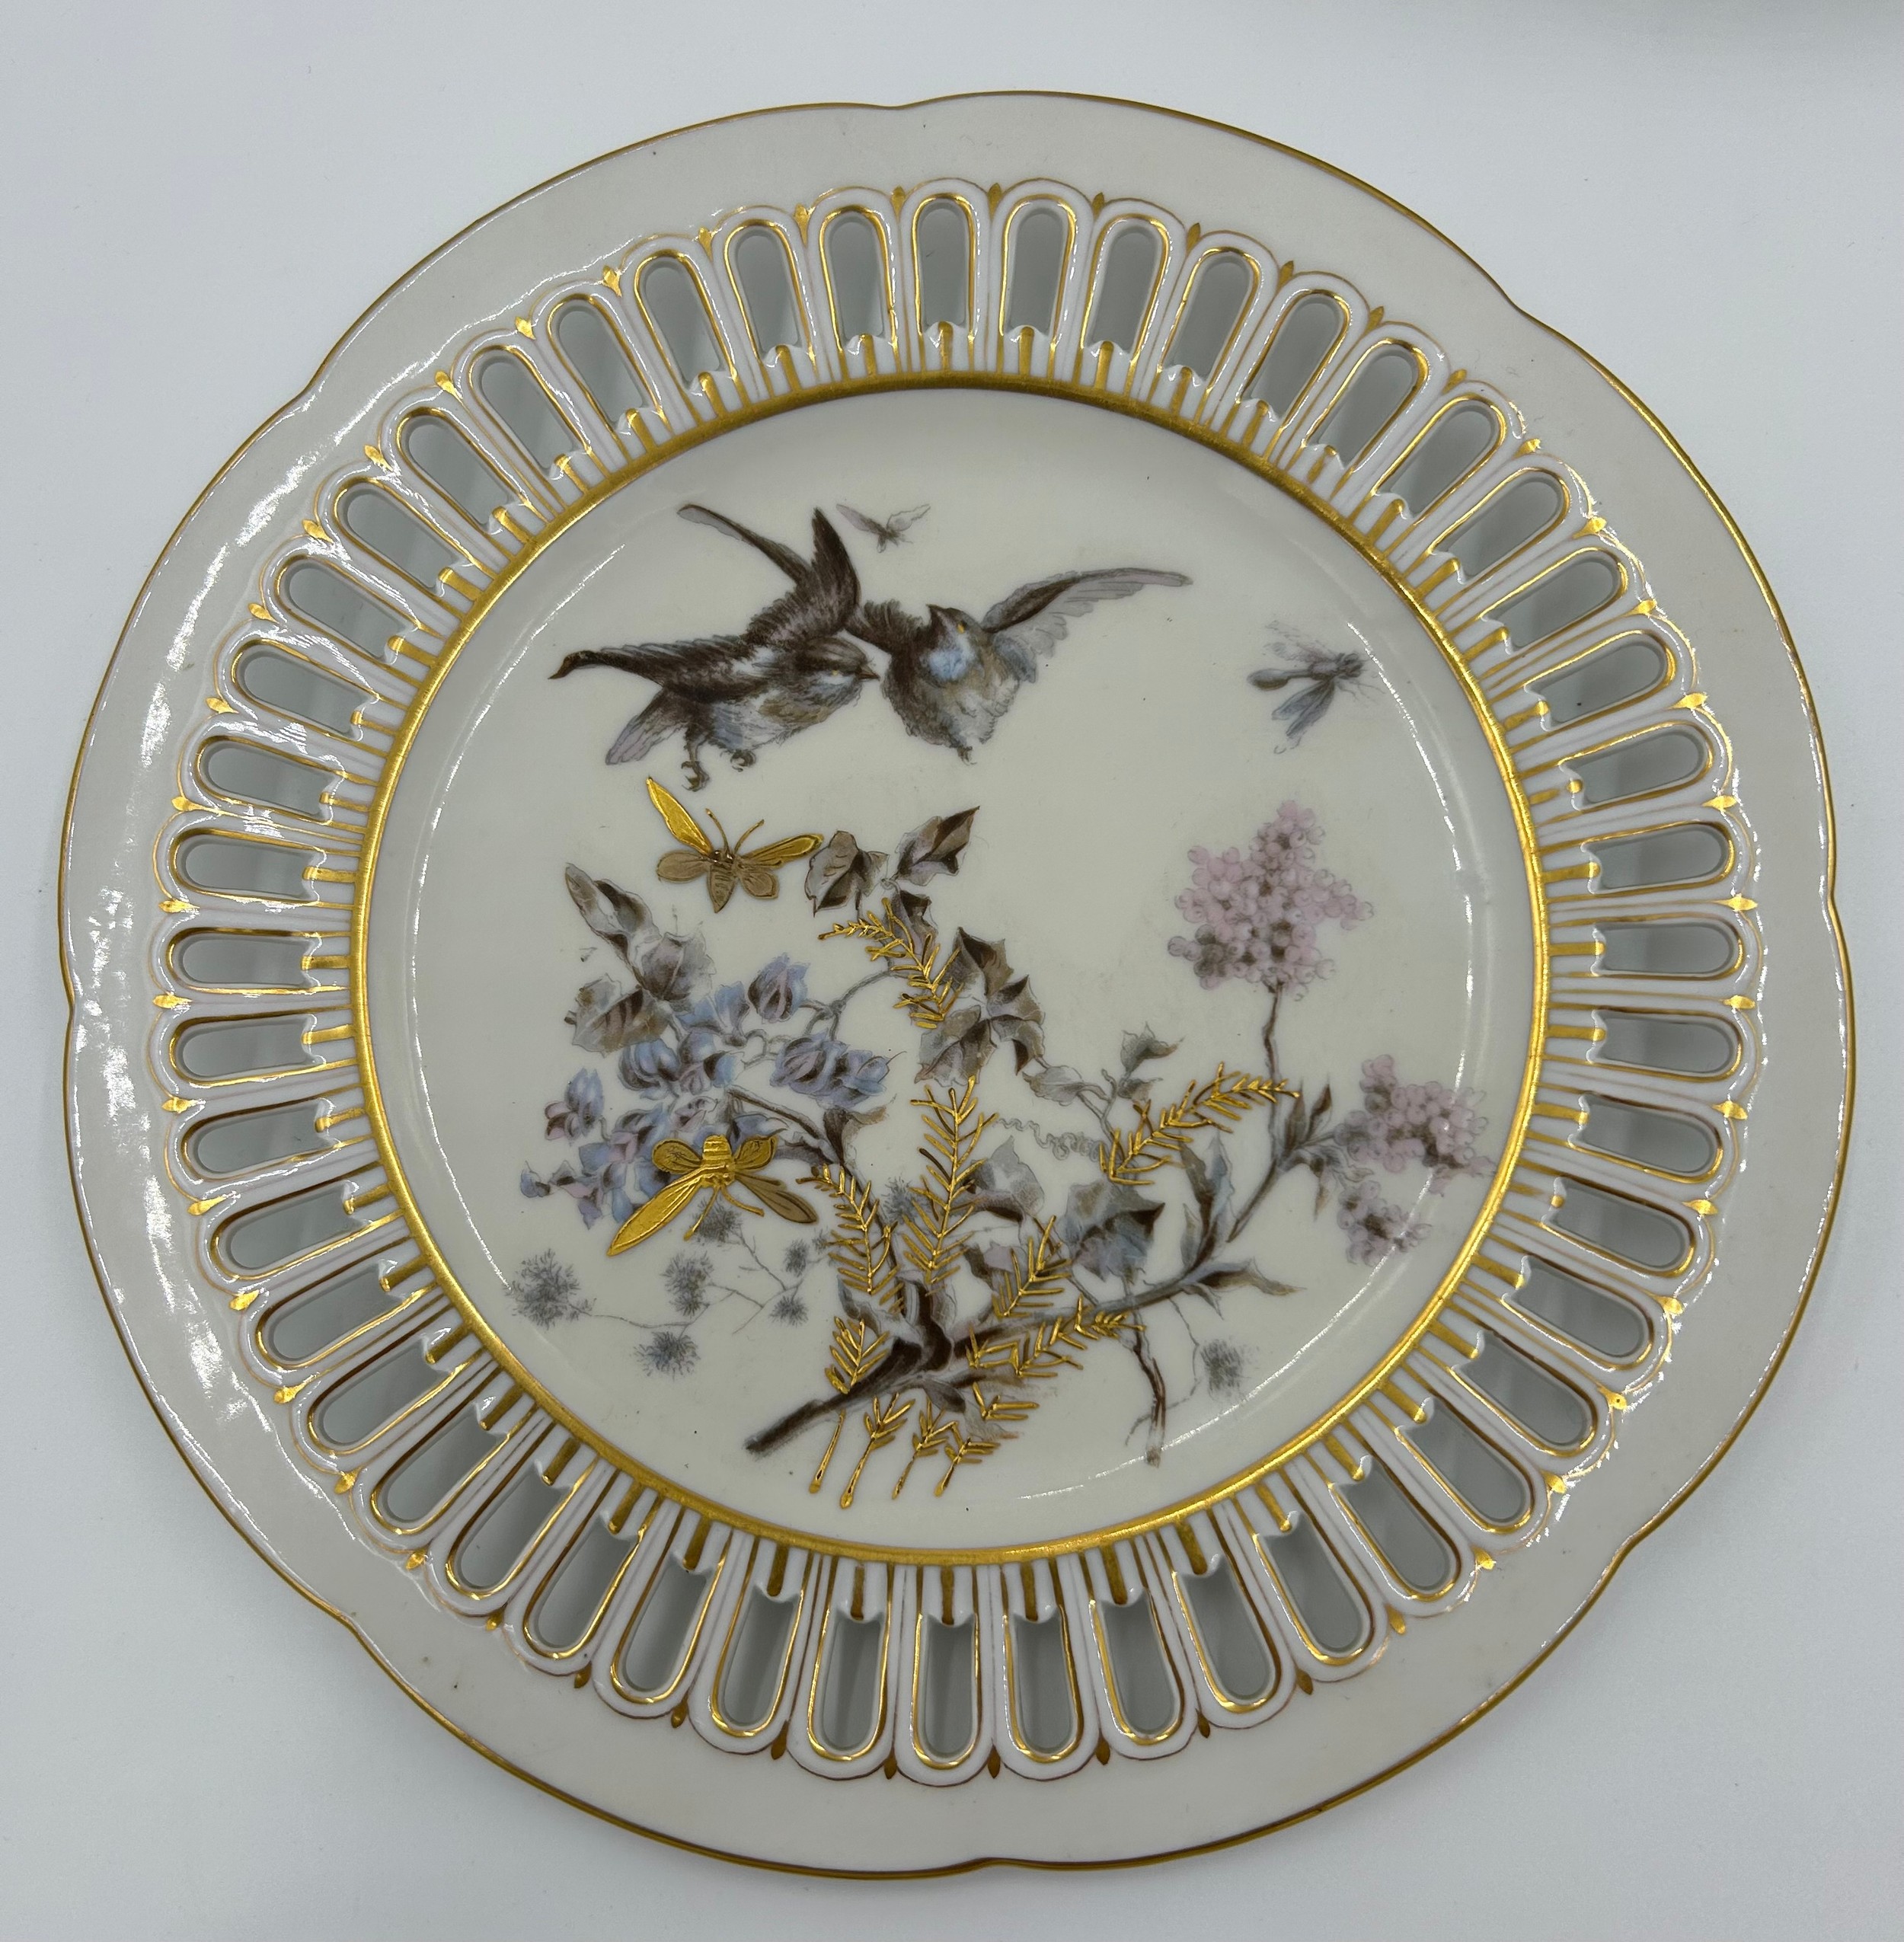 Fischer & Mieg 19thC porcelain part tea service, with ribbon borders, floral, bird and gold insect - Image 2 of 5